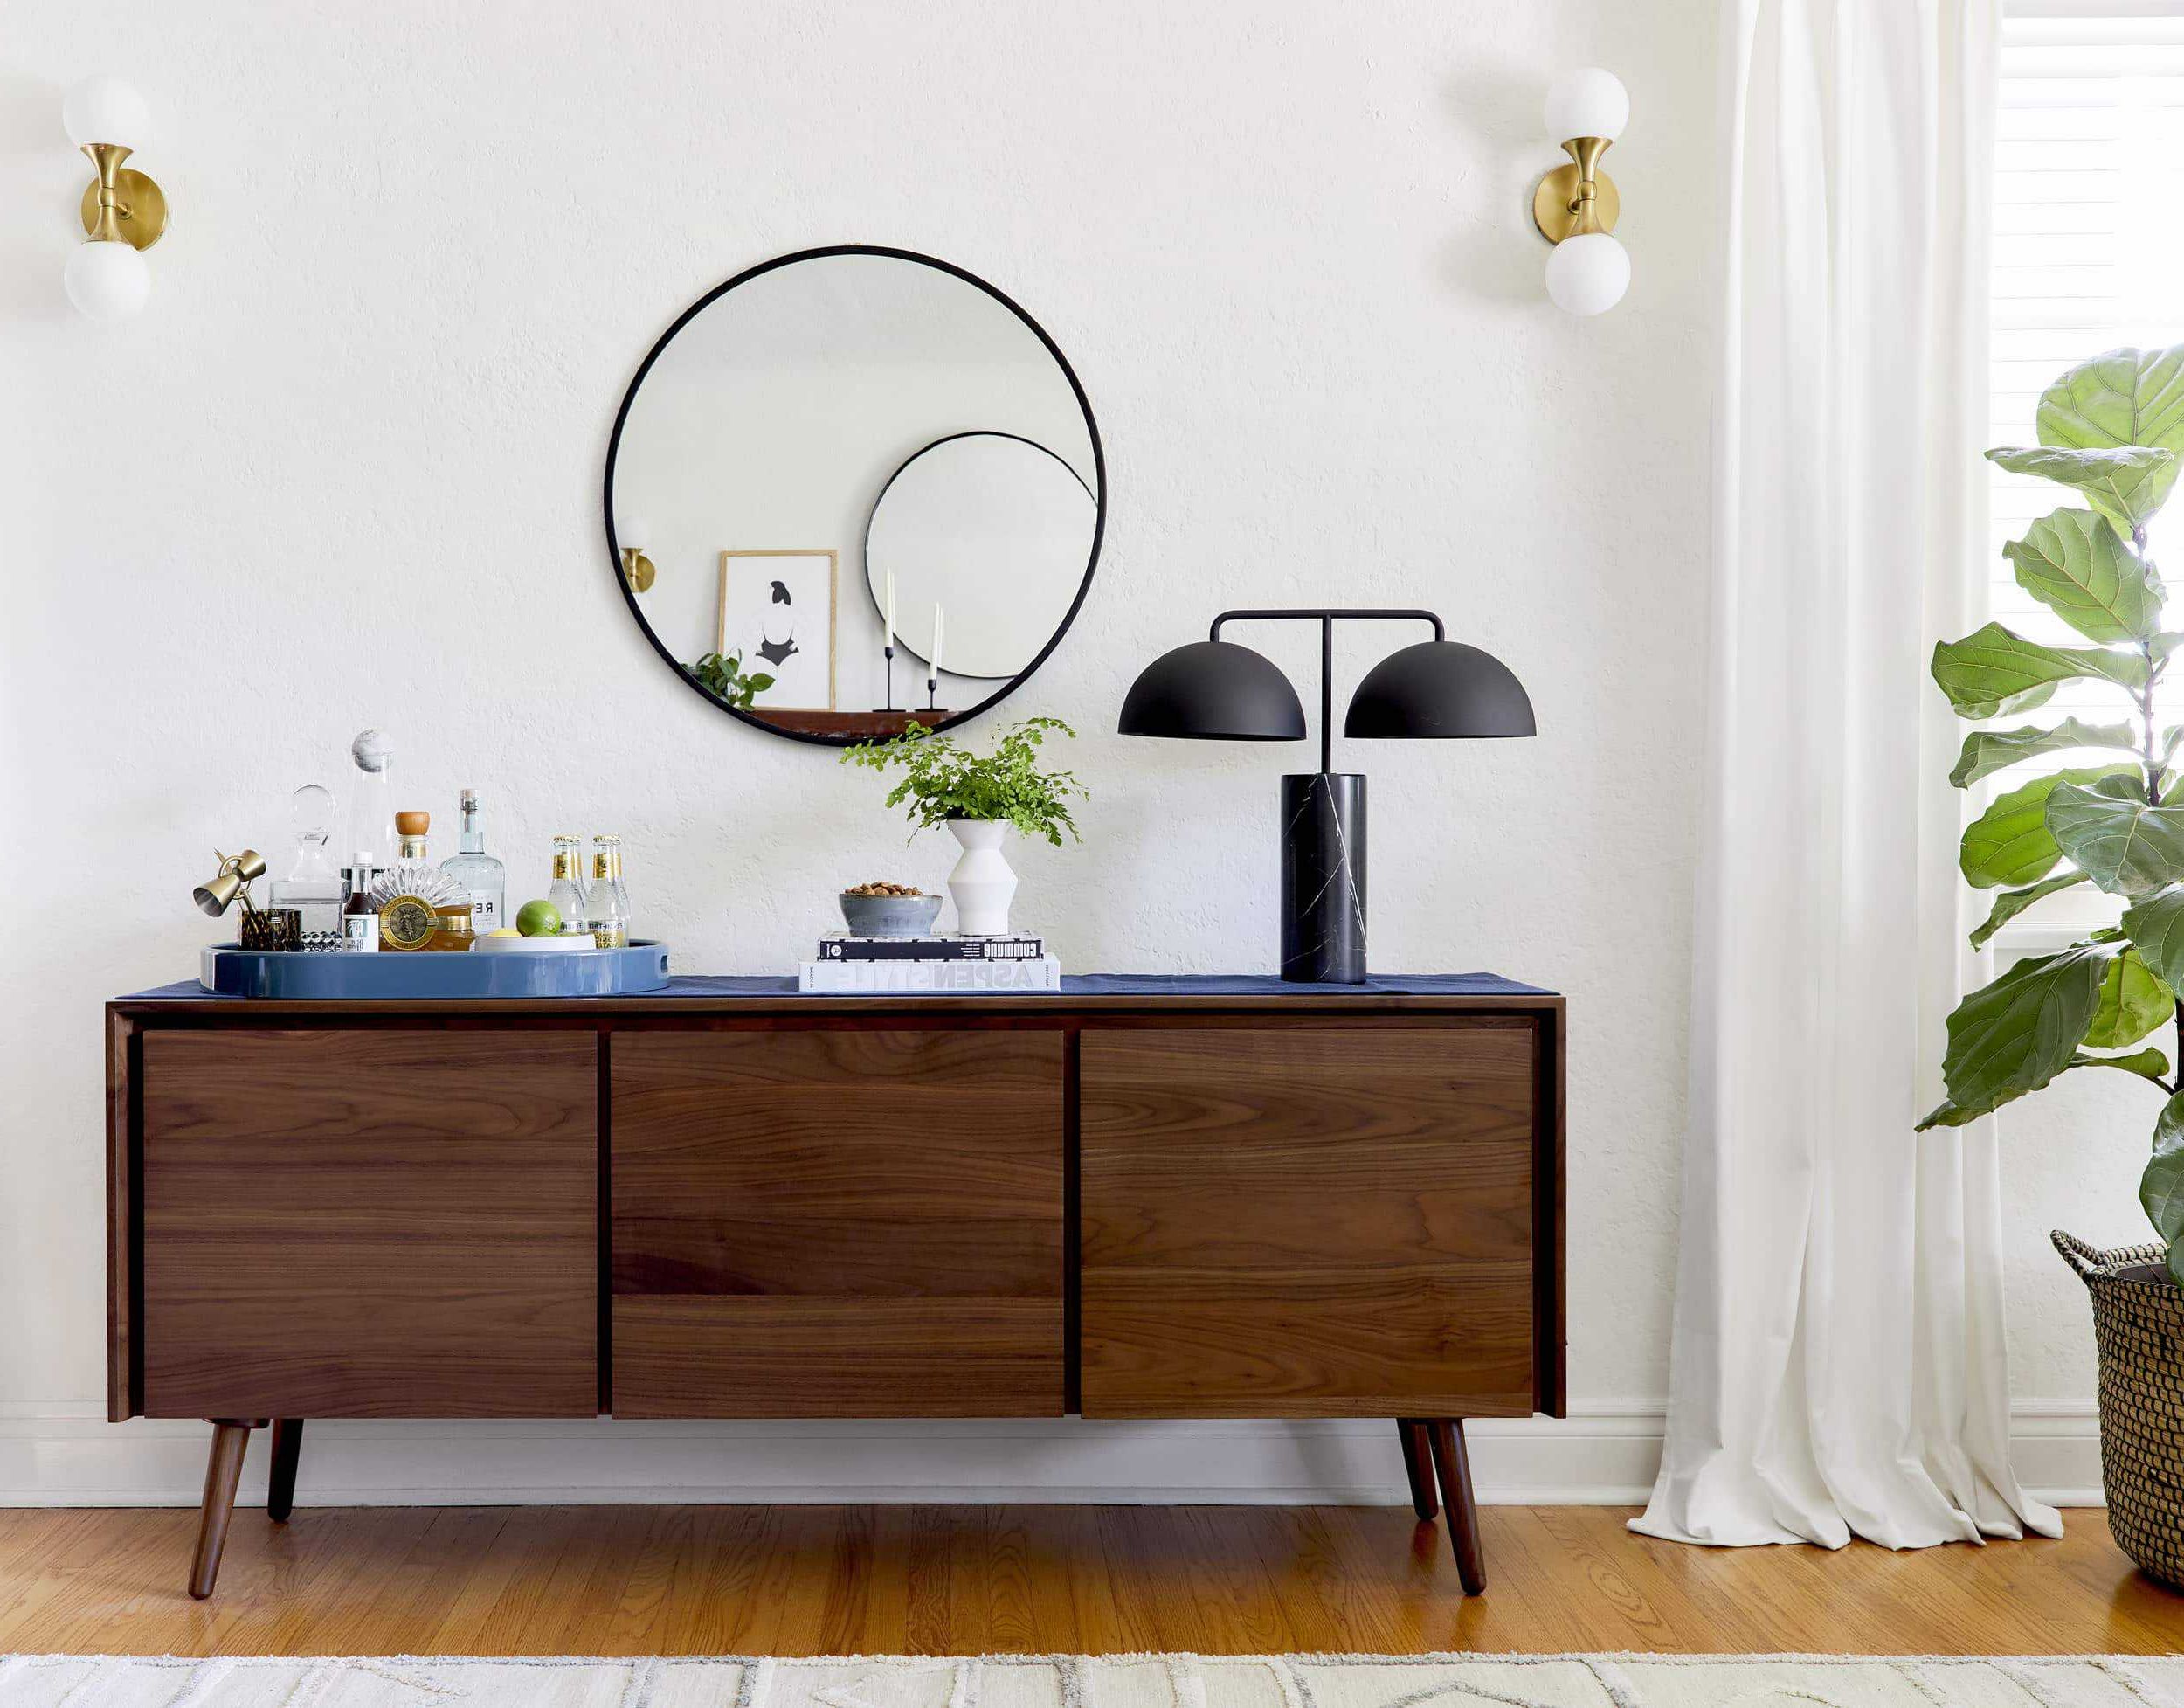 Well Known 4 Ways To Style That Credenza For "real Life" + Shop Our Favorite Credenzas  – Emily Henderson With Credenzas For Living Room (View 6 of 10)